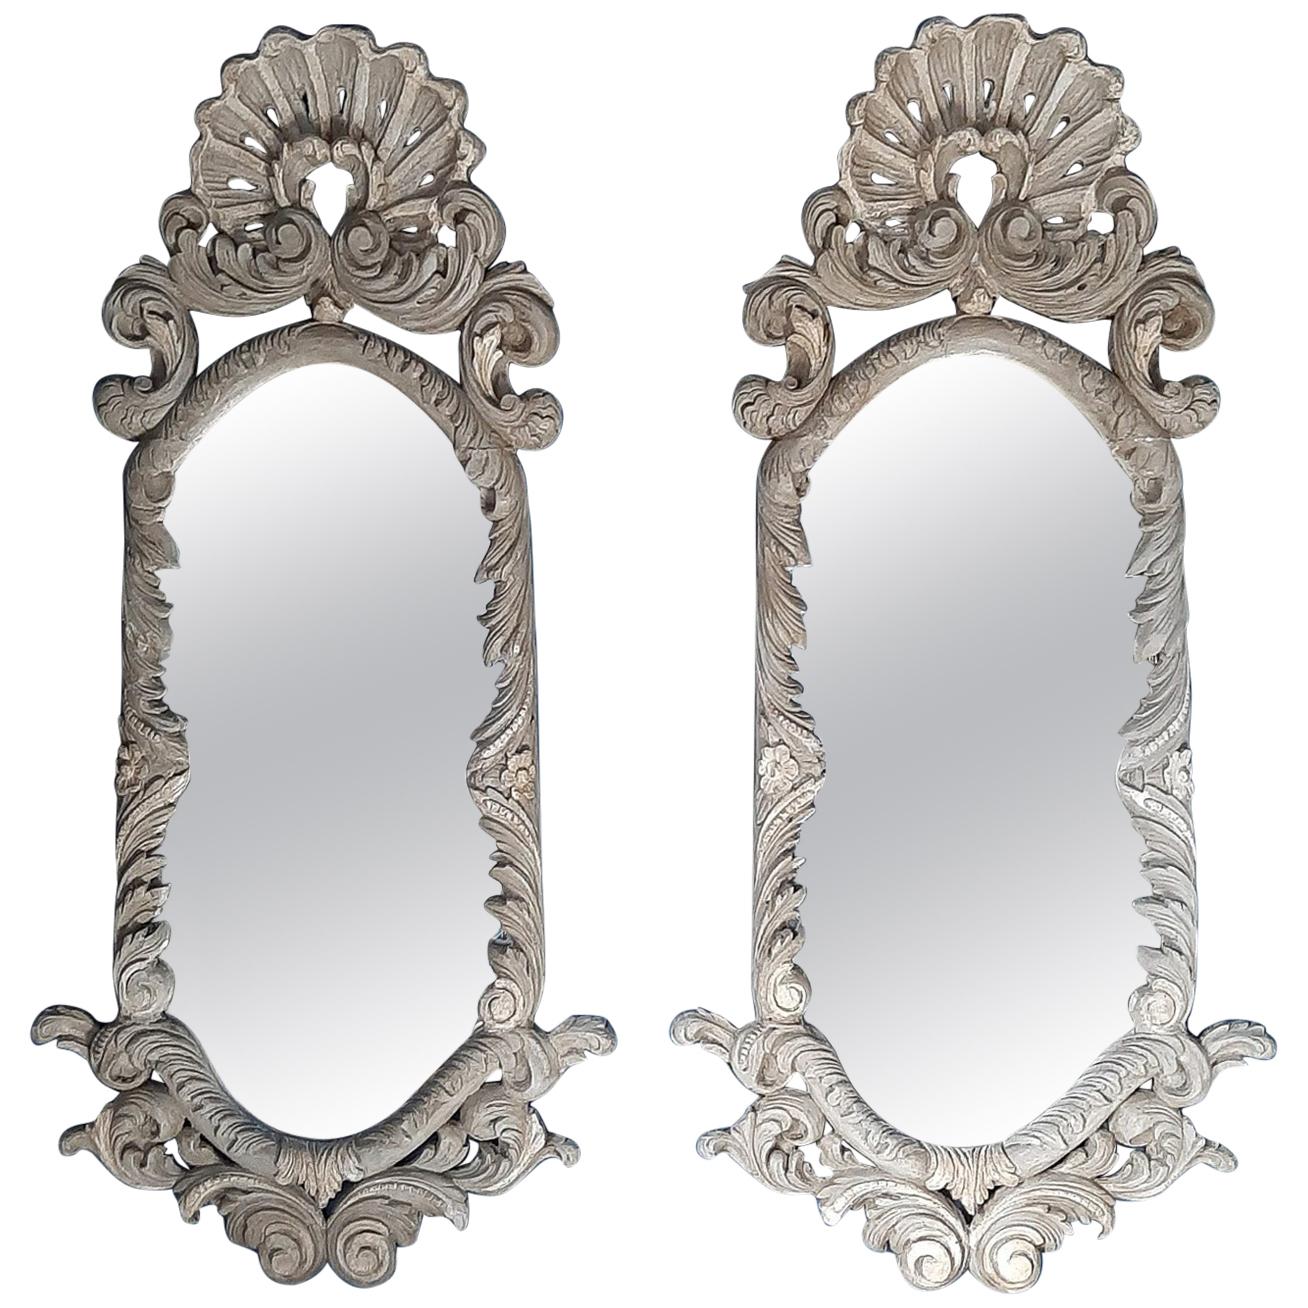 Pair of 19th Century Italian Carved Wood Mirrors with a Light Green Gray Patina